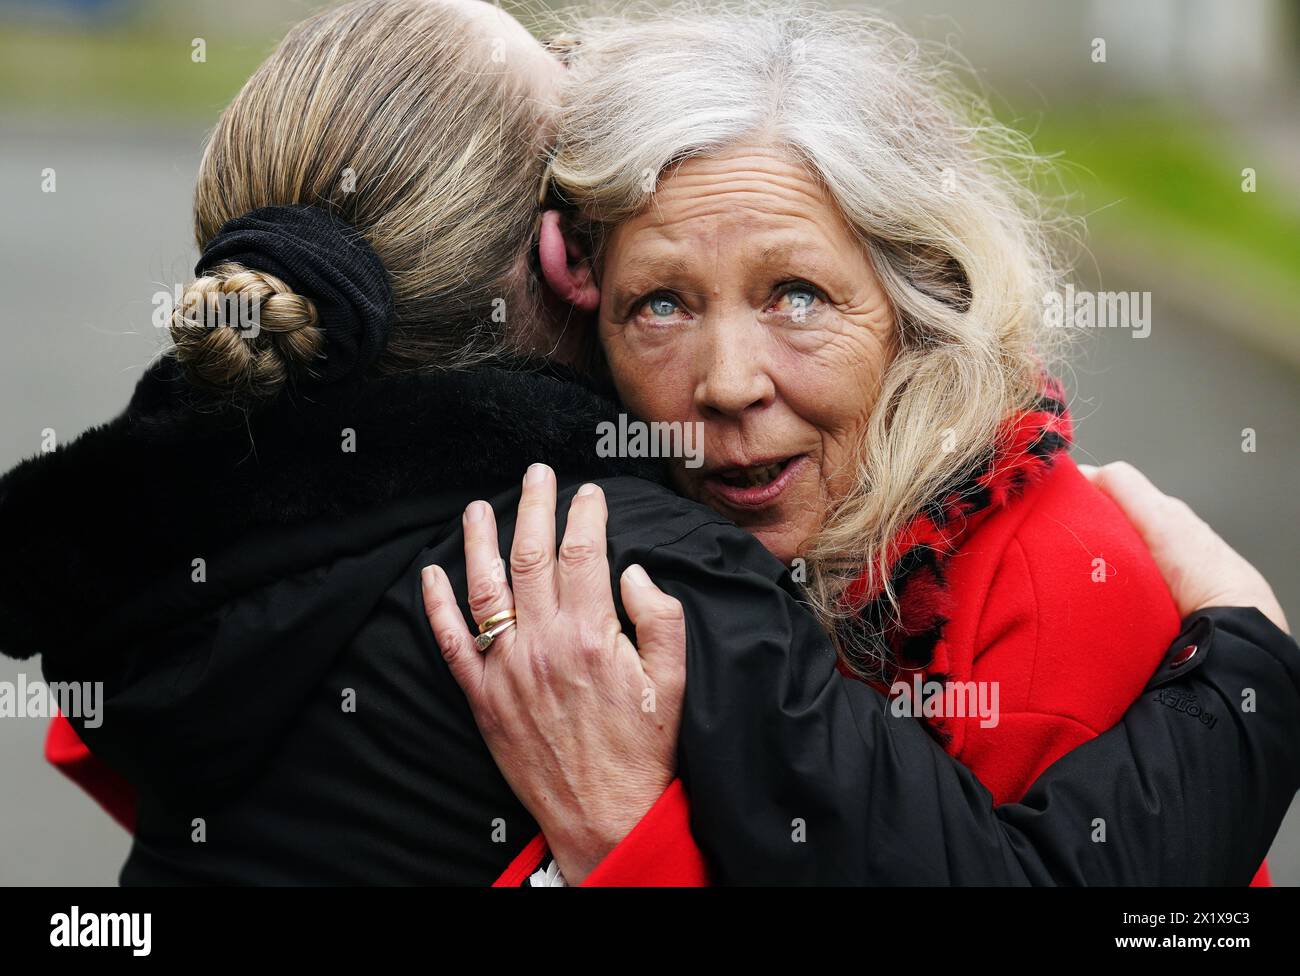 Stardust survivor Antoinette Keegan (right) and her sister Lorraine, who lost their sisters Mary and Martina, embrace outside Dublin Coroner's Court after a verdict of unlawful killing has been returned by the jury in the Stardust fire inquests for all 48 people who died in the Dublin nightclub disaster in the early hours of Valentine's Day in 1981, the worst fire disaster in the history of the Irish state. The inquests, which are the longest held in Ireland, began in April last year and have heard evidence from 373 people. Picture date: Thursday April 18, 2024. Stock Photo